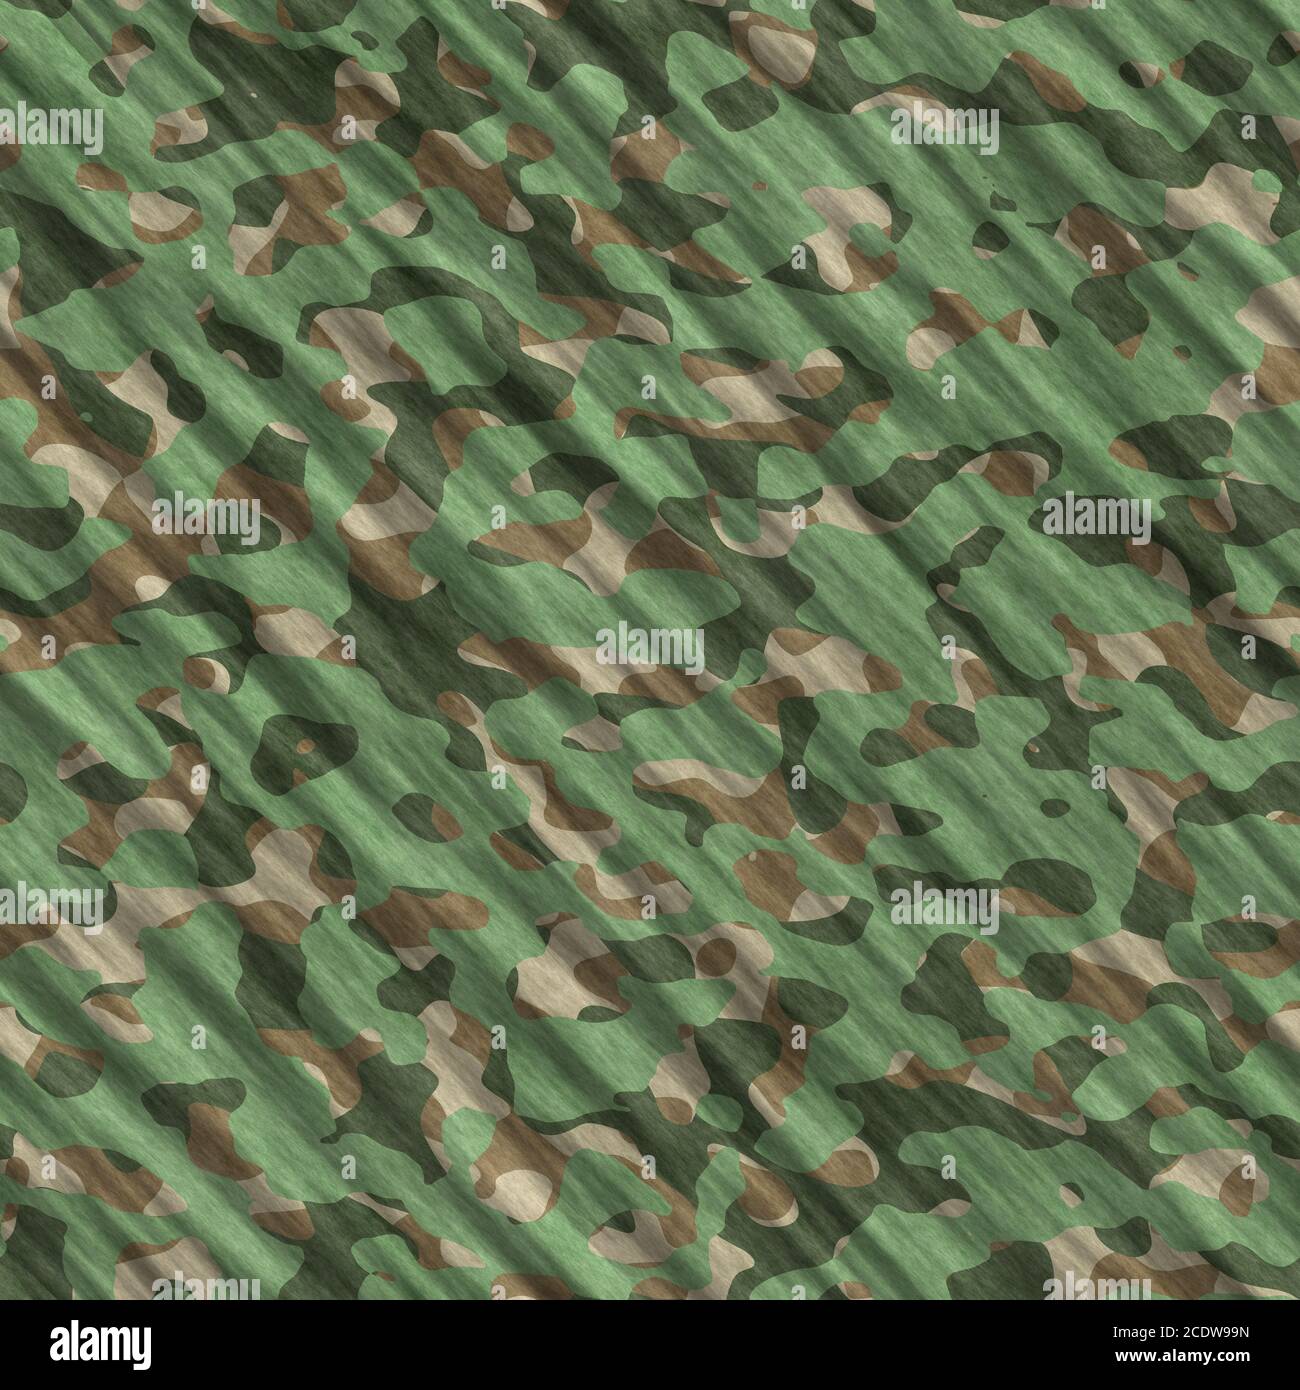 Camouflage pattern background seamless illustration. Classic clothing style masking camo repeat print. Green brown black olive c Stock Photo